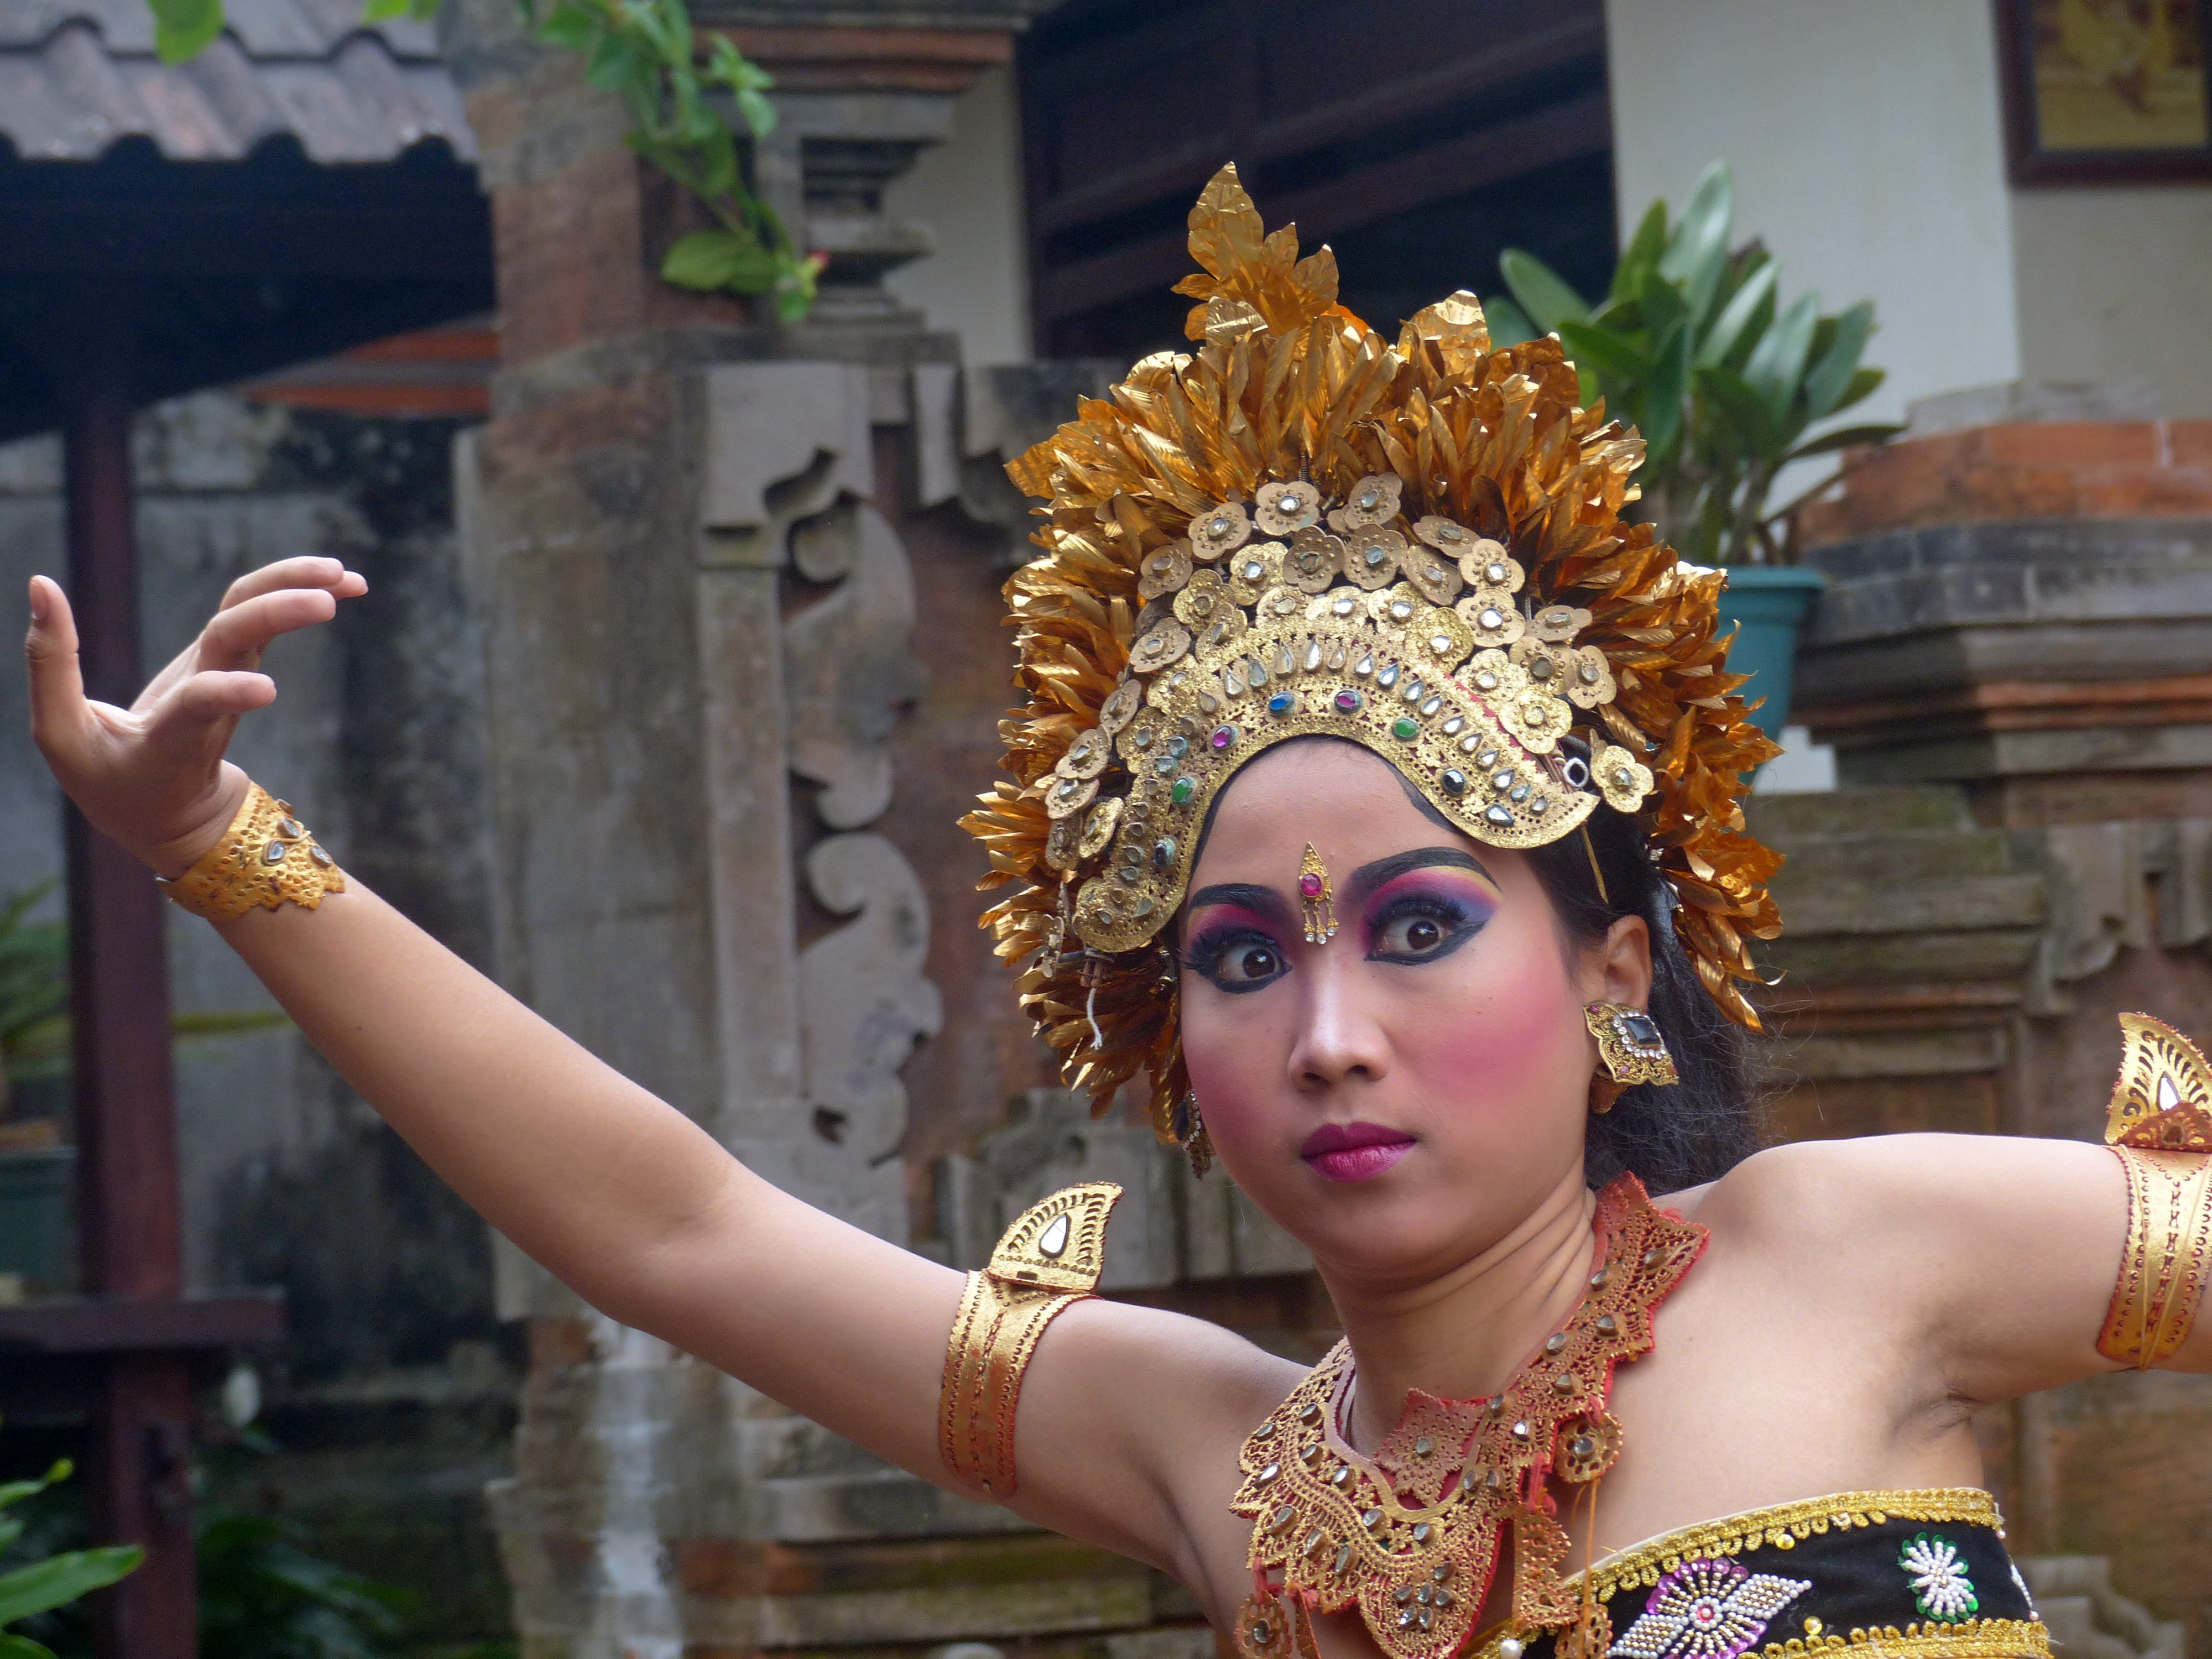 Free Download Hd Wallpaper Woman Wearing Traditional Costume Indonesia Bali Dancer Show